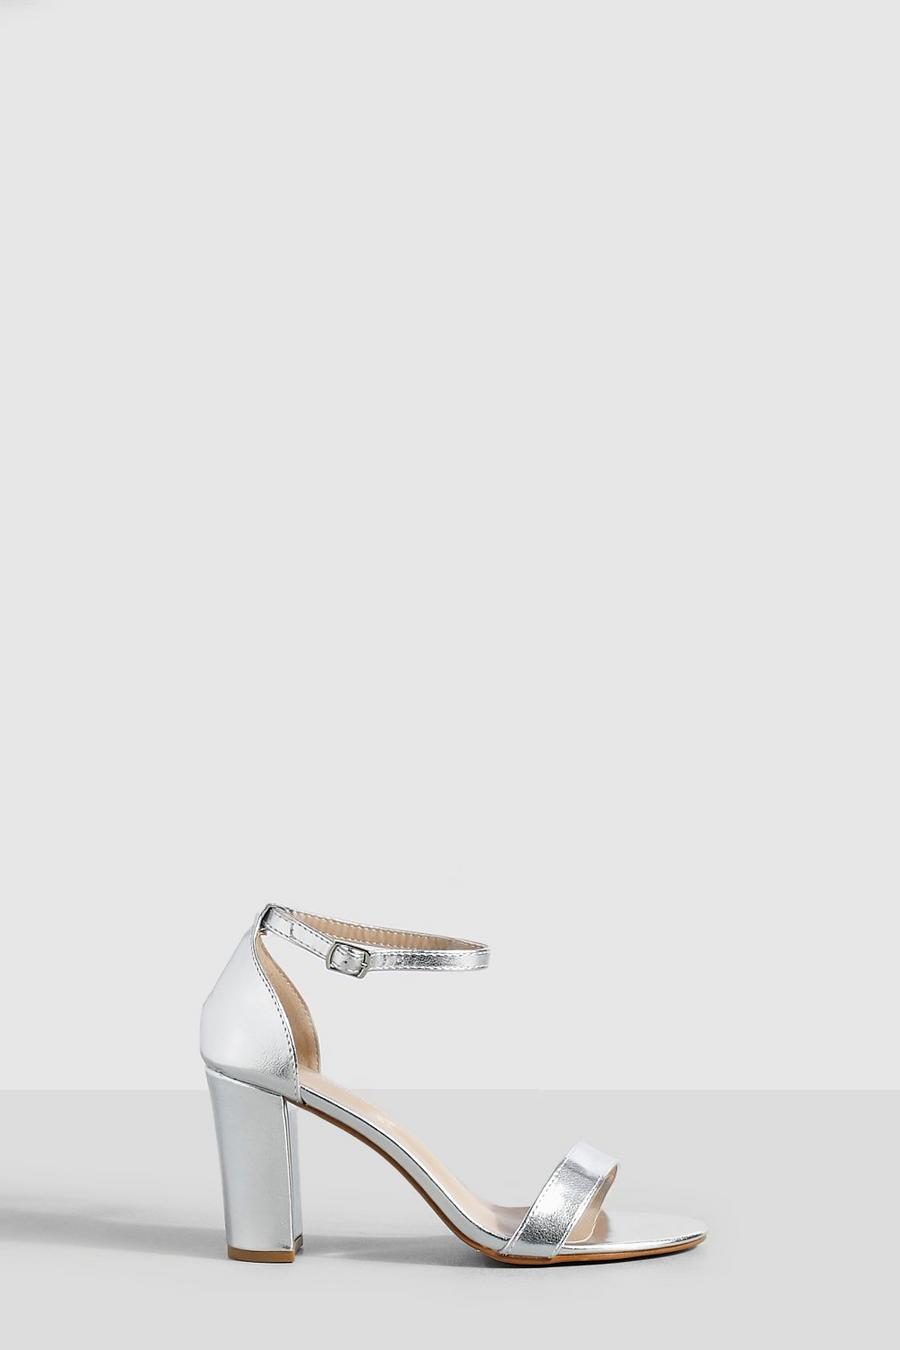 Silver Metallic High Block 2 Part Barely There Heels  